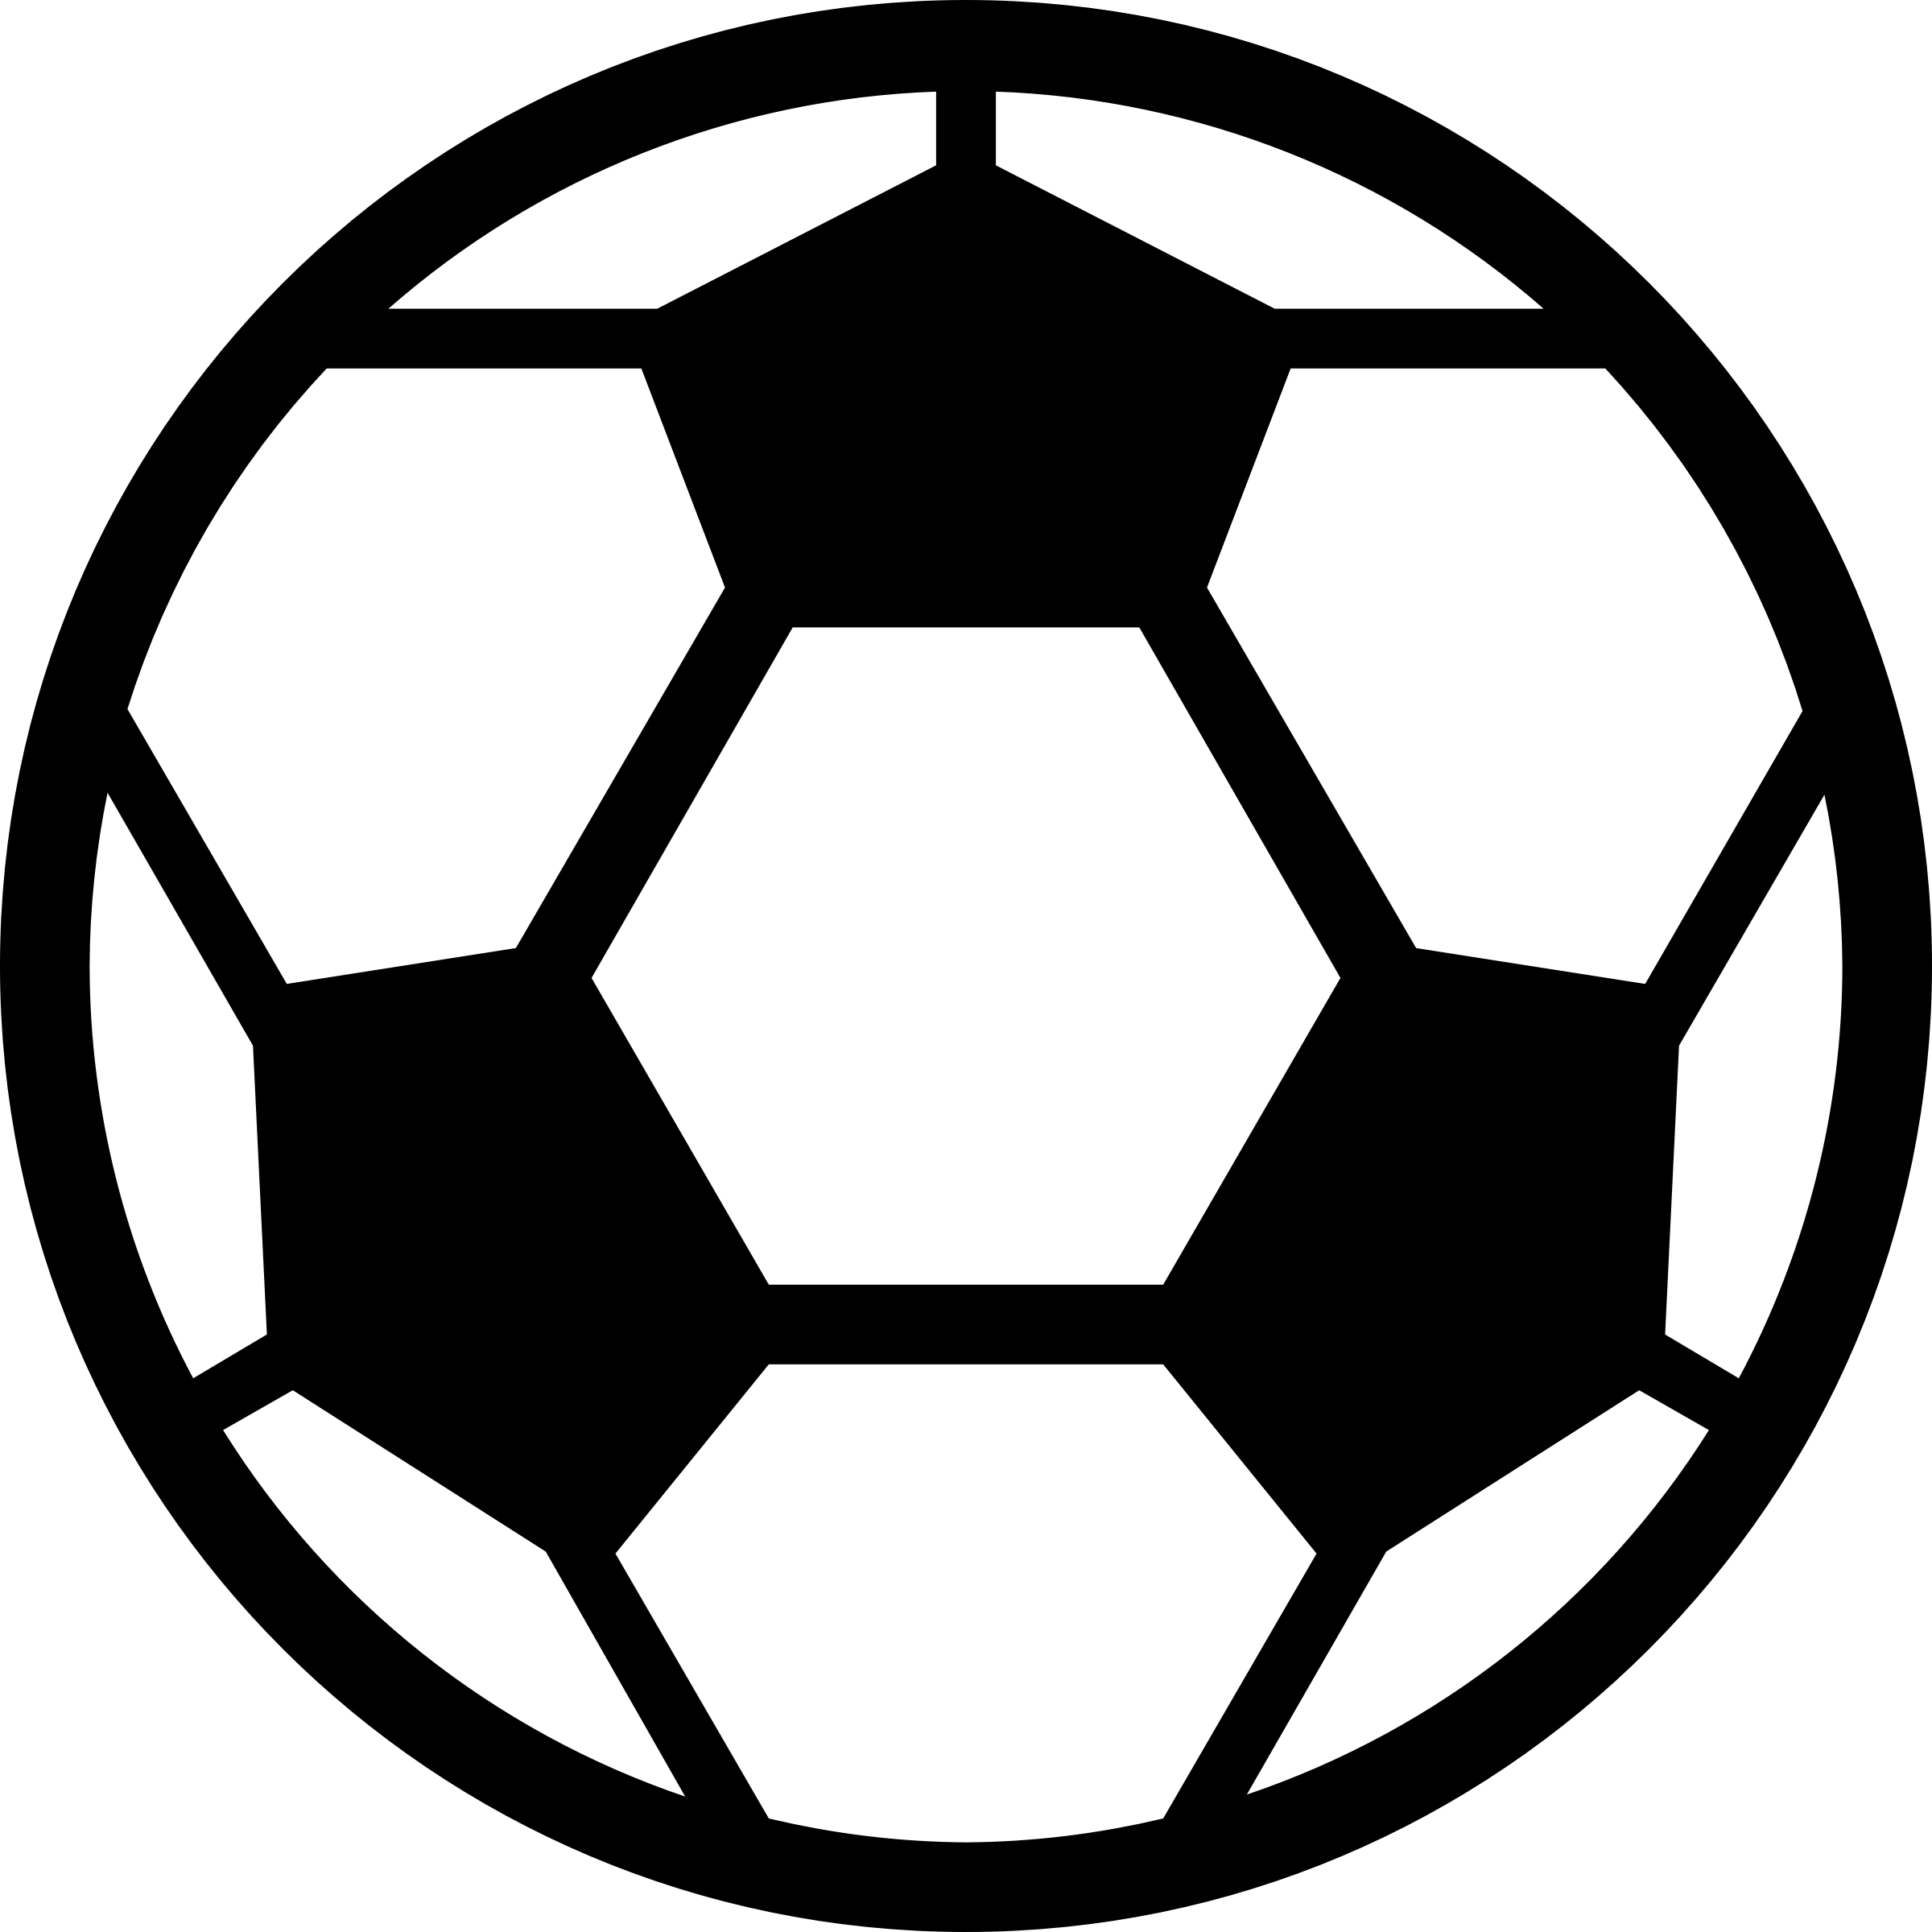 free clipart images of soccer balls - photo #32